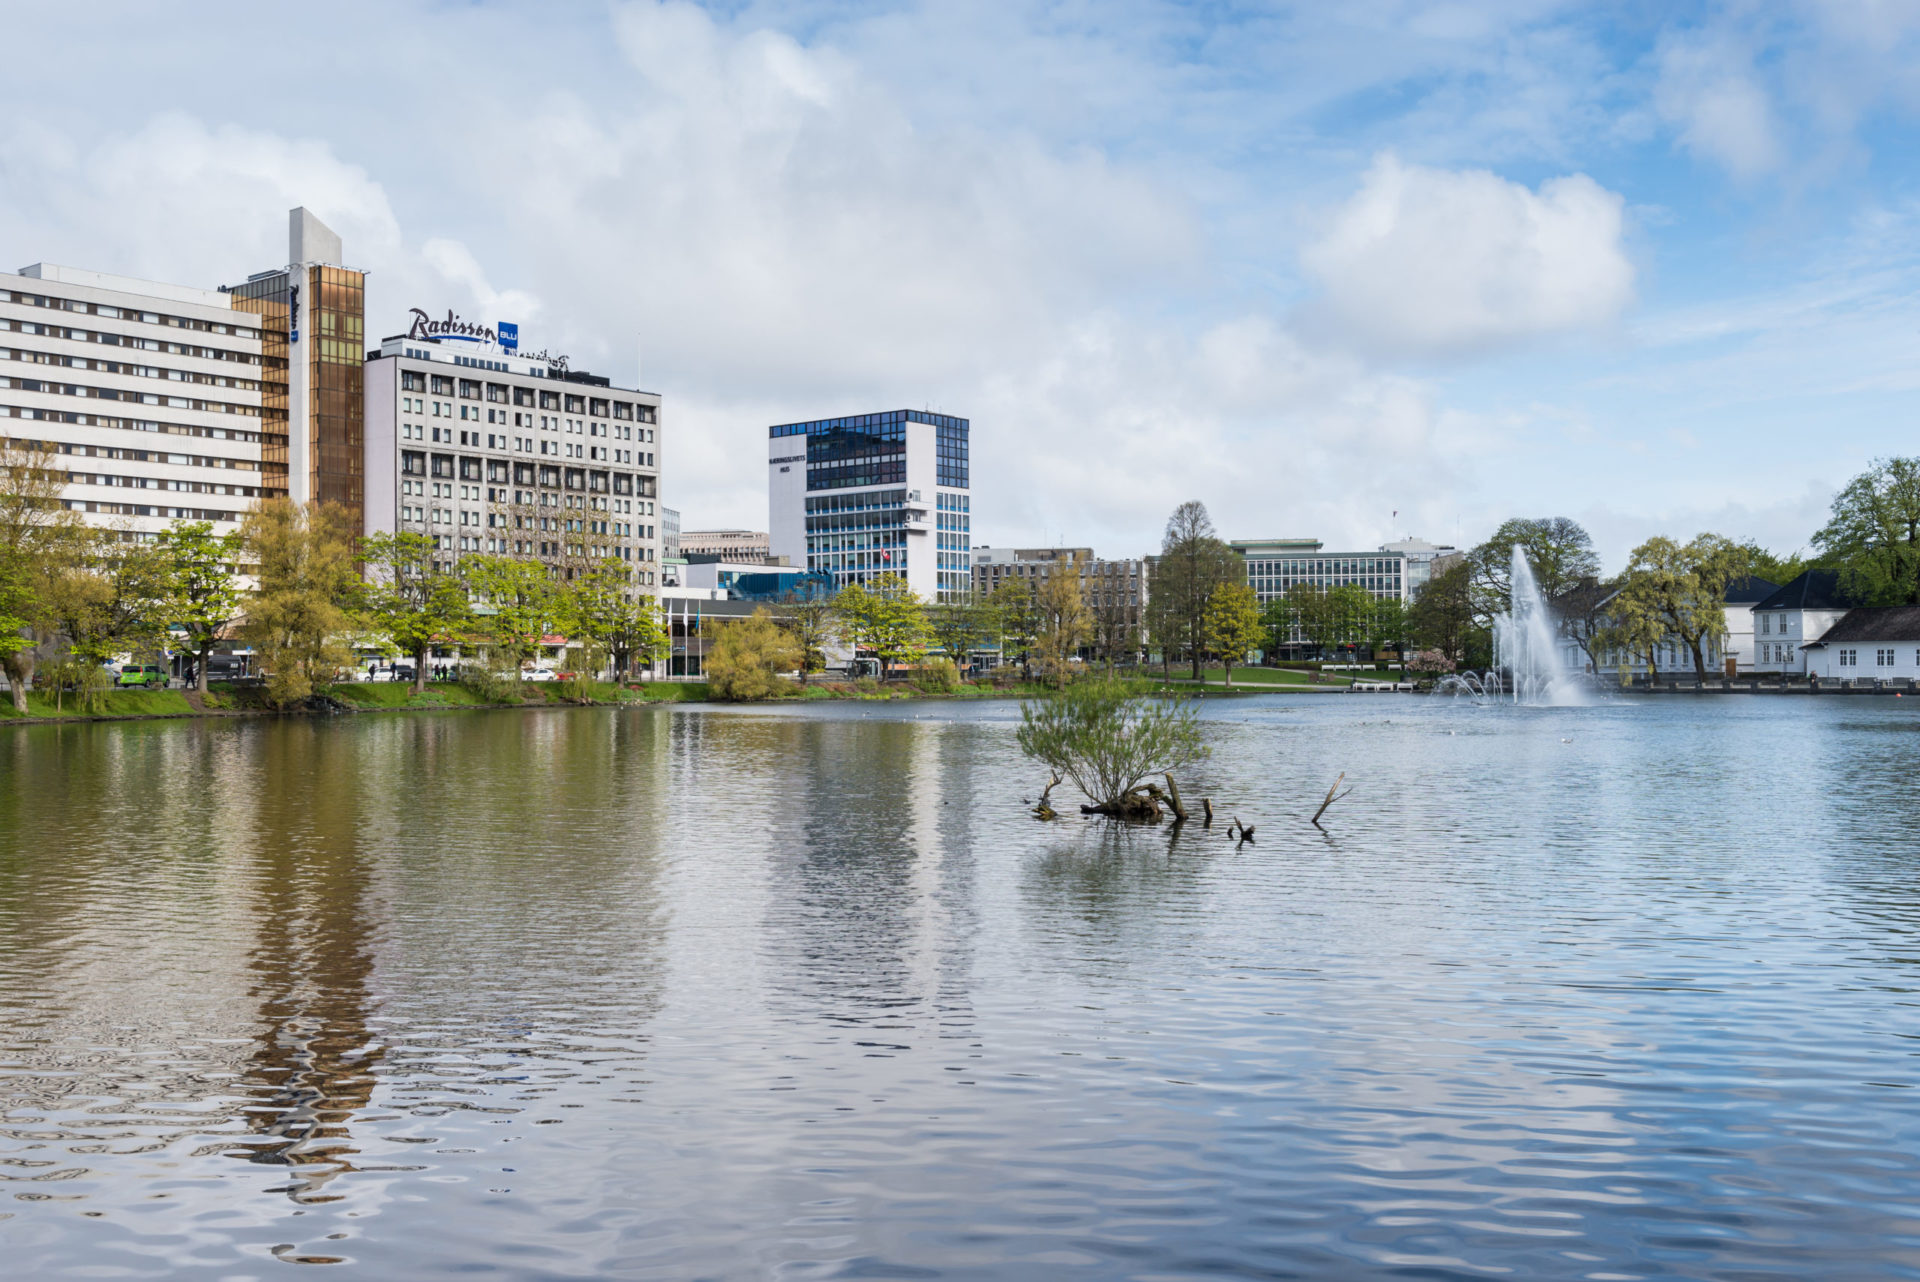 Stavanger, Norway - May 27, 2015: View of the Breiavatnet lake and the water fountain along with commercial buildings and a hotel in the city center of Stavanger, Norway